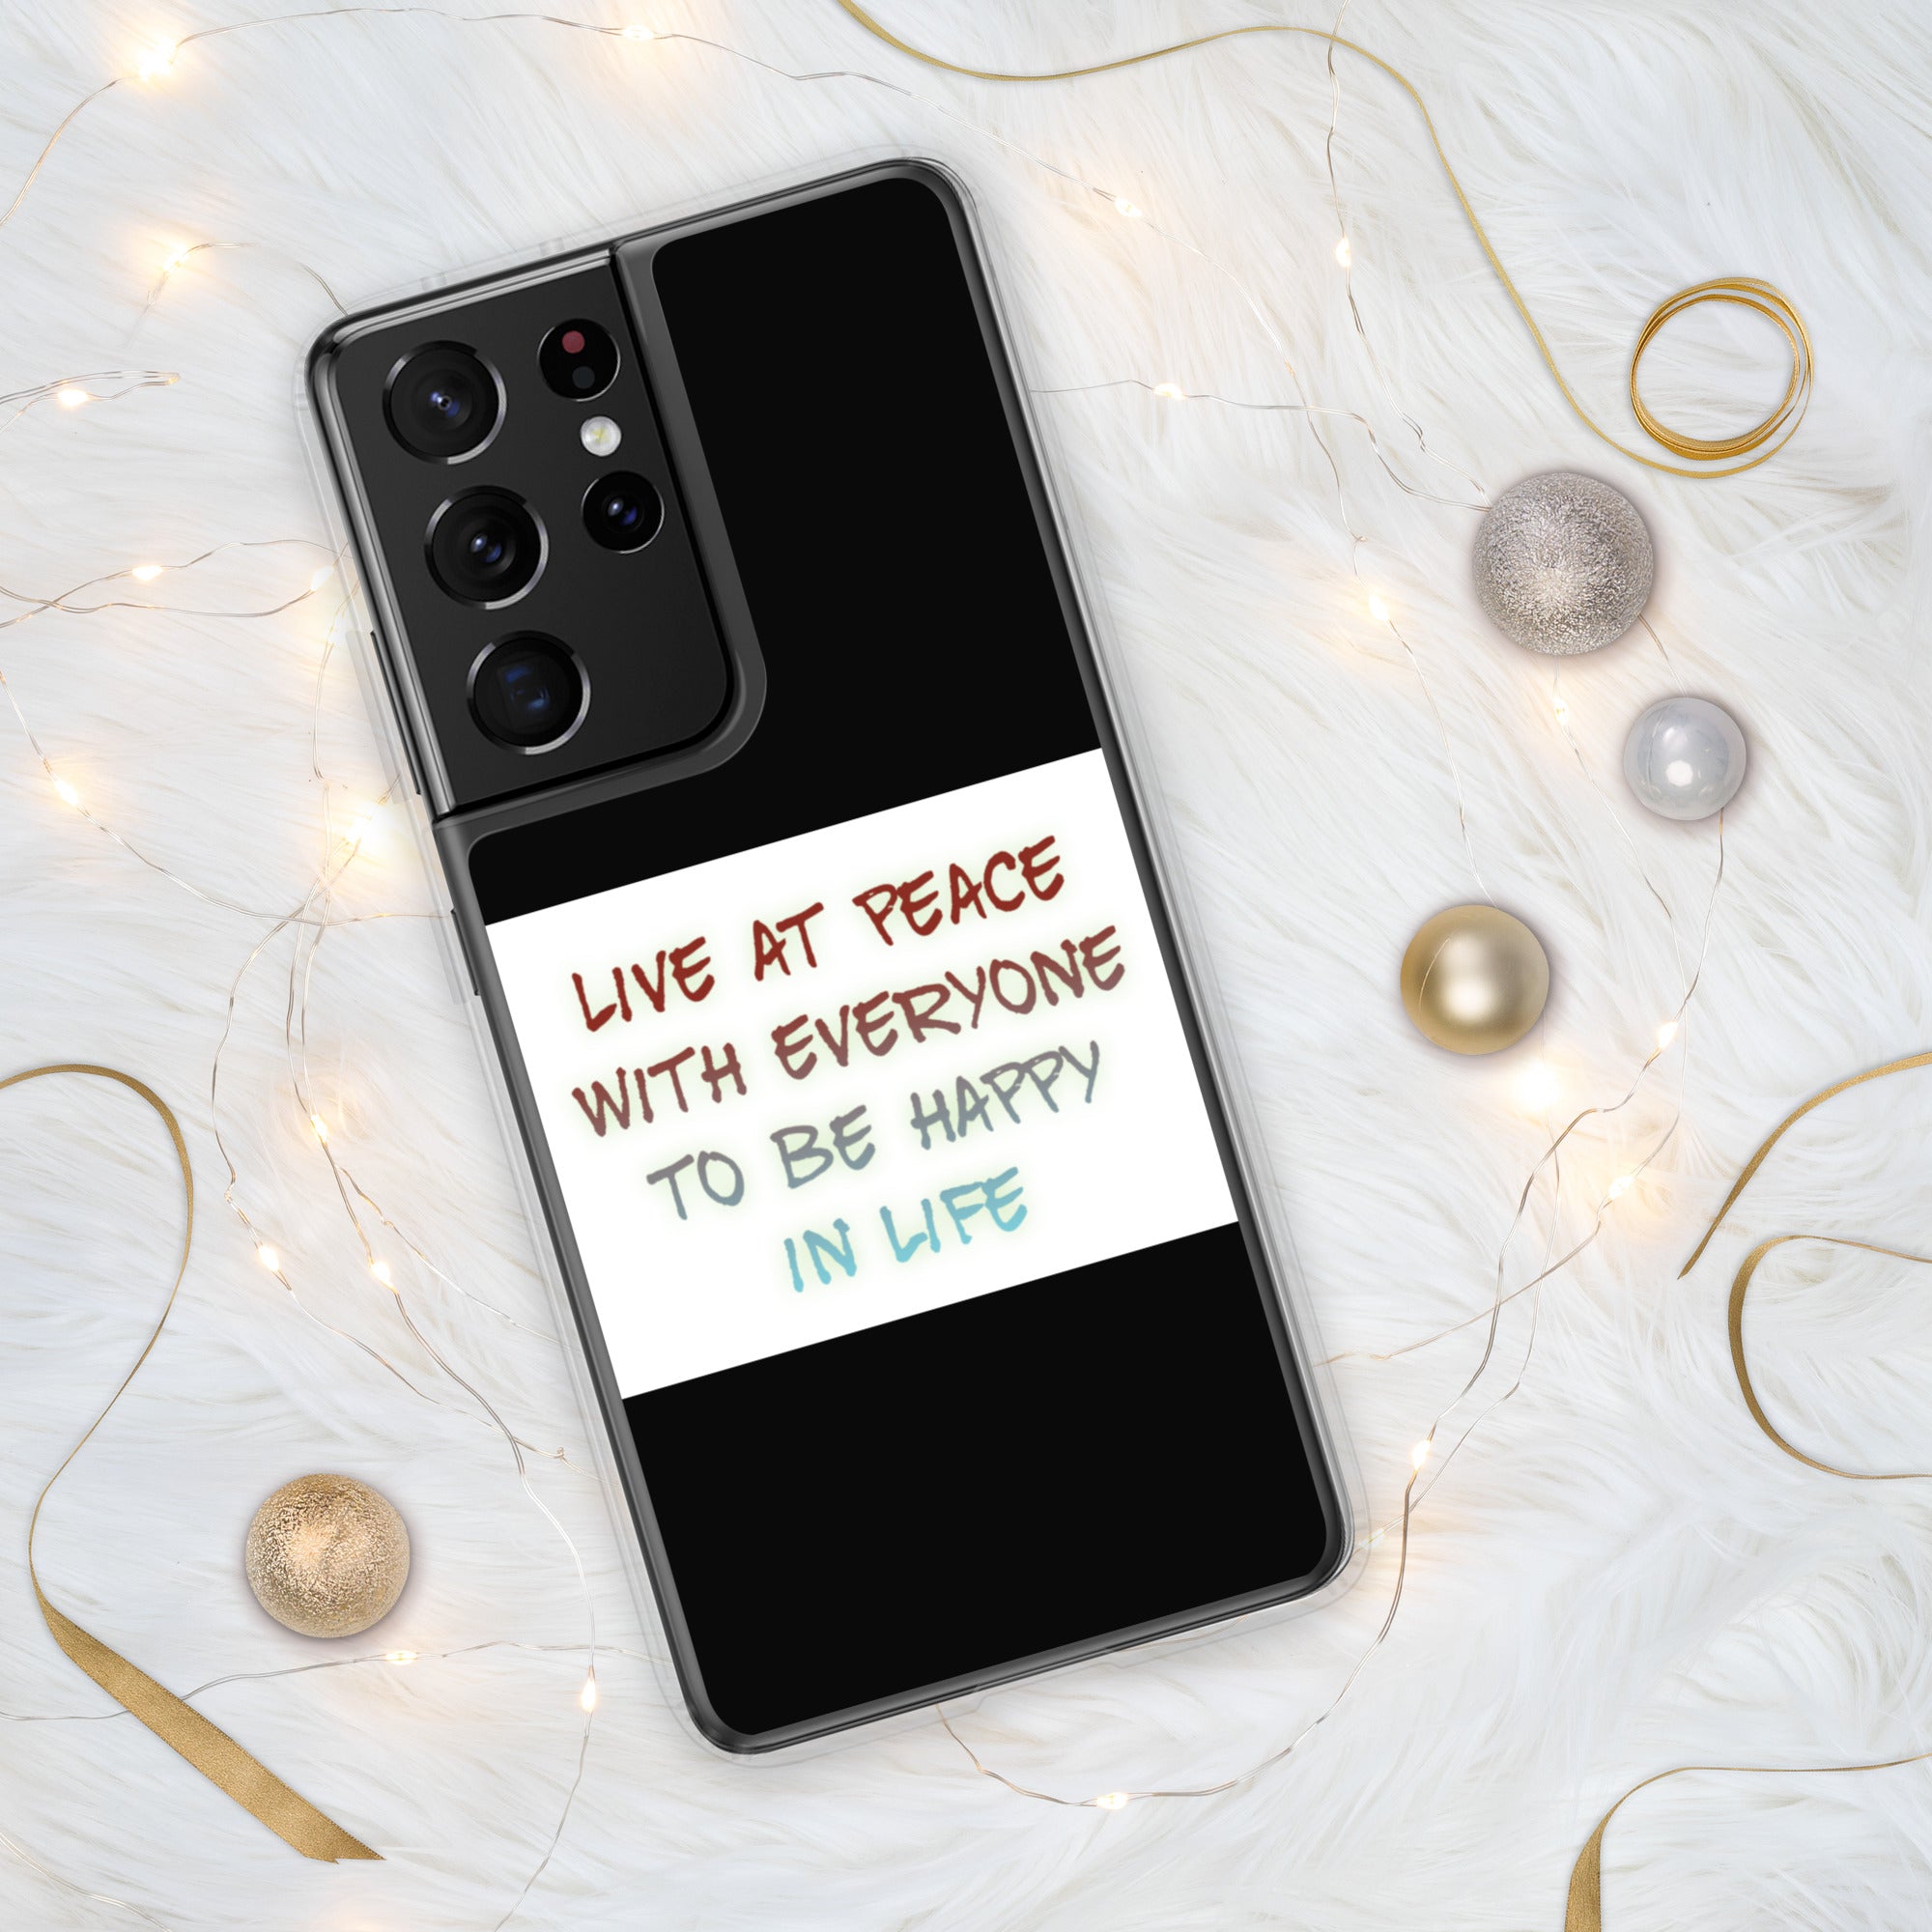 GloWell Designs - Samsung Case - Motivational Quote - Live At Peace With Everyone - GloWell Designs